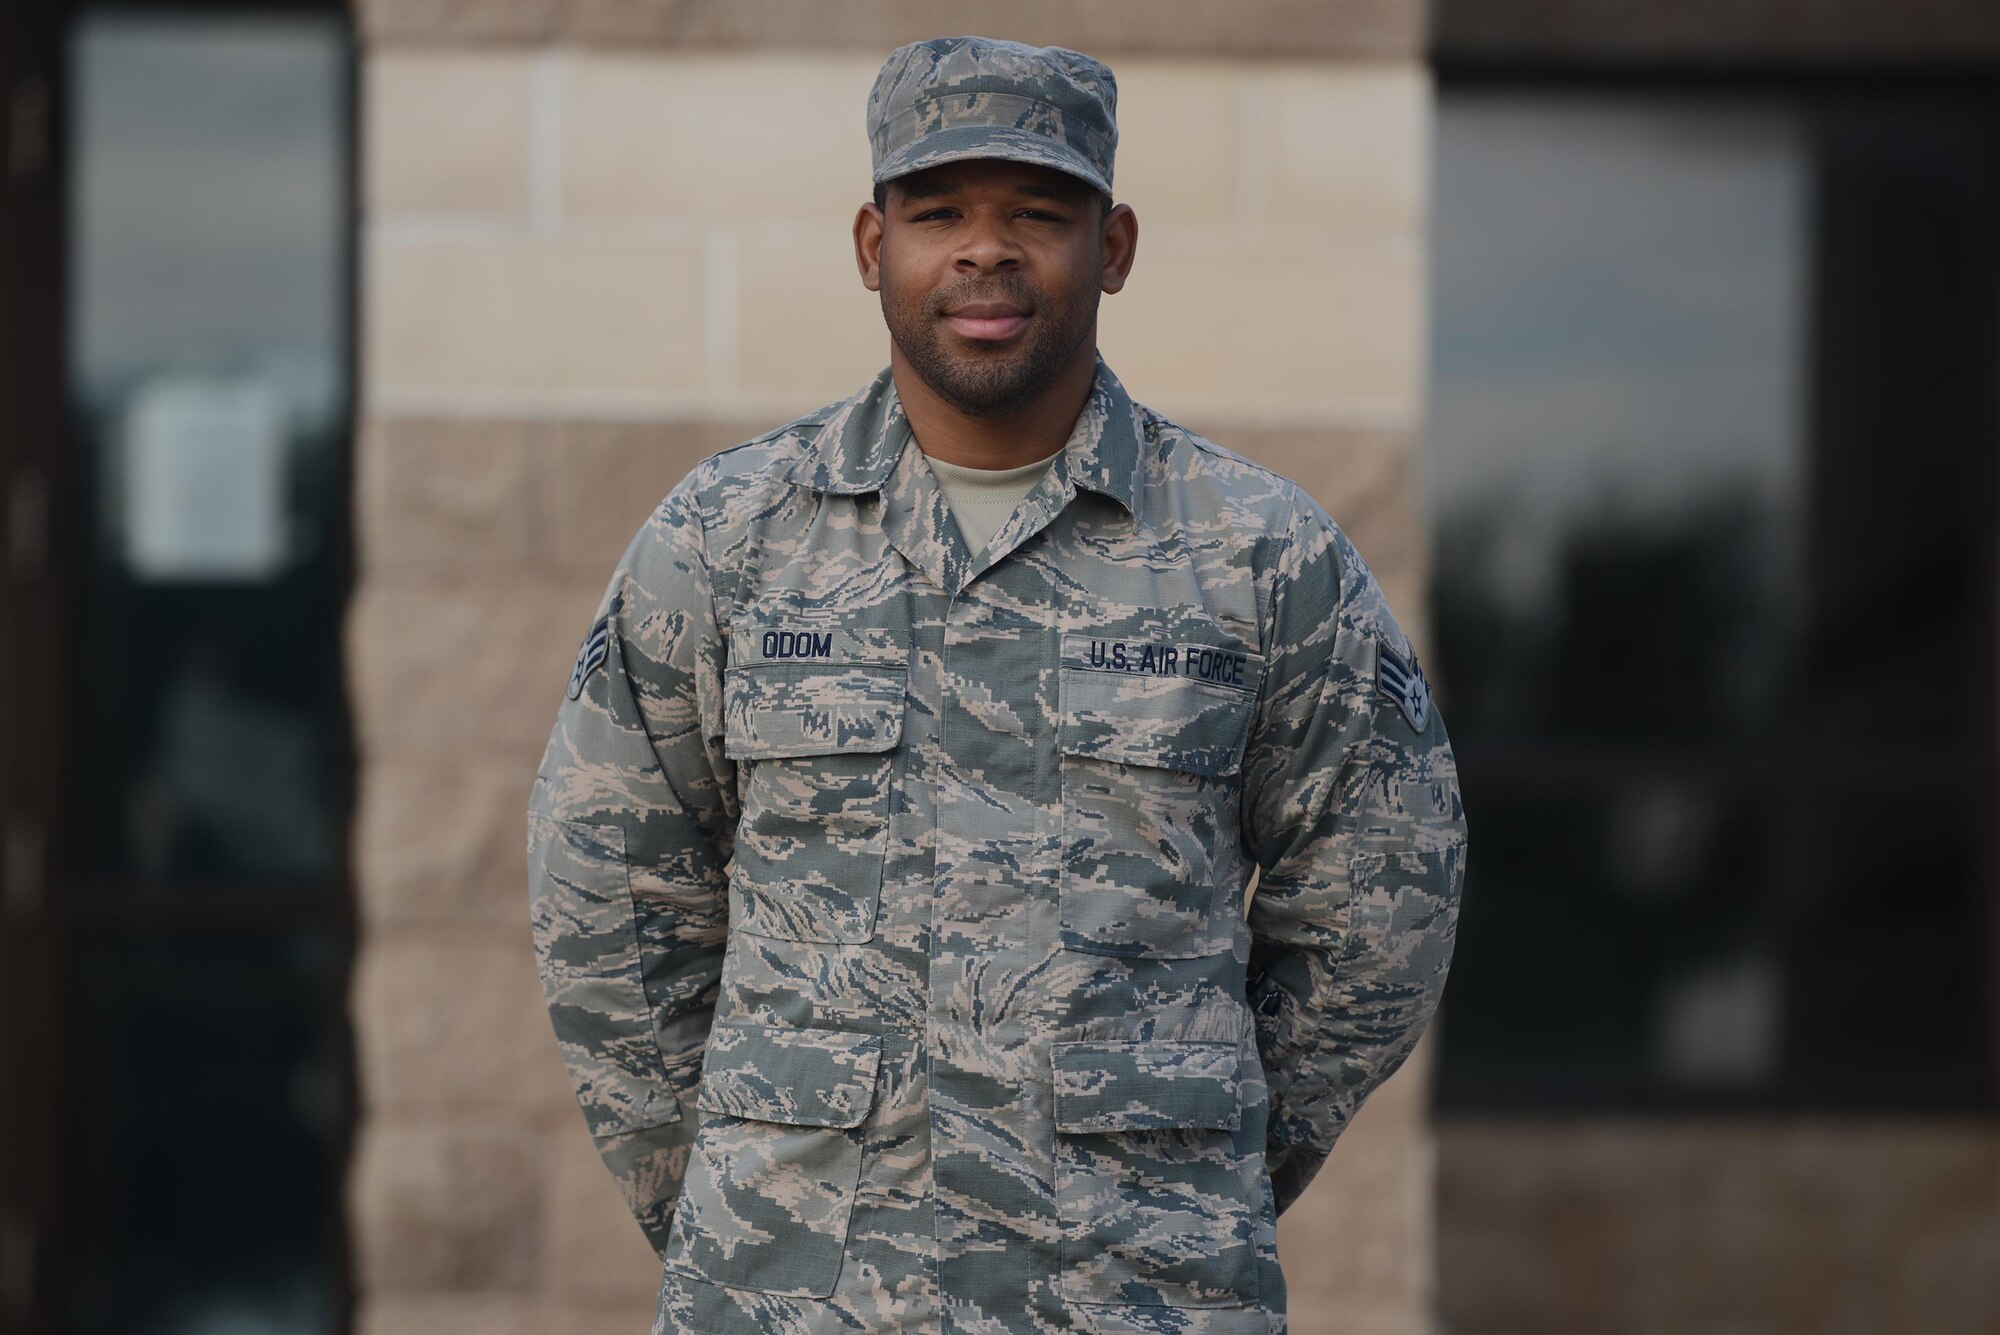 Senior Airman Steven Odom, 47th Force Support Squadron management apprentice, stands in front of the FSS building on Laughlin Air Force Base, Texas, Aug. 31, 2016. Odom was chosen by wing leadership to be this week’s XLer. (U.S. Air Force photo/Airman 1st Class Brandon May)